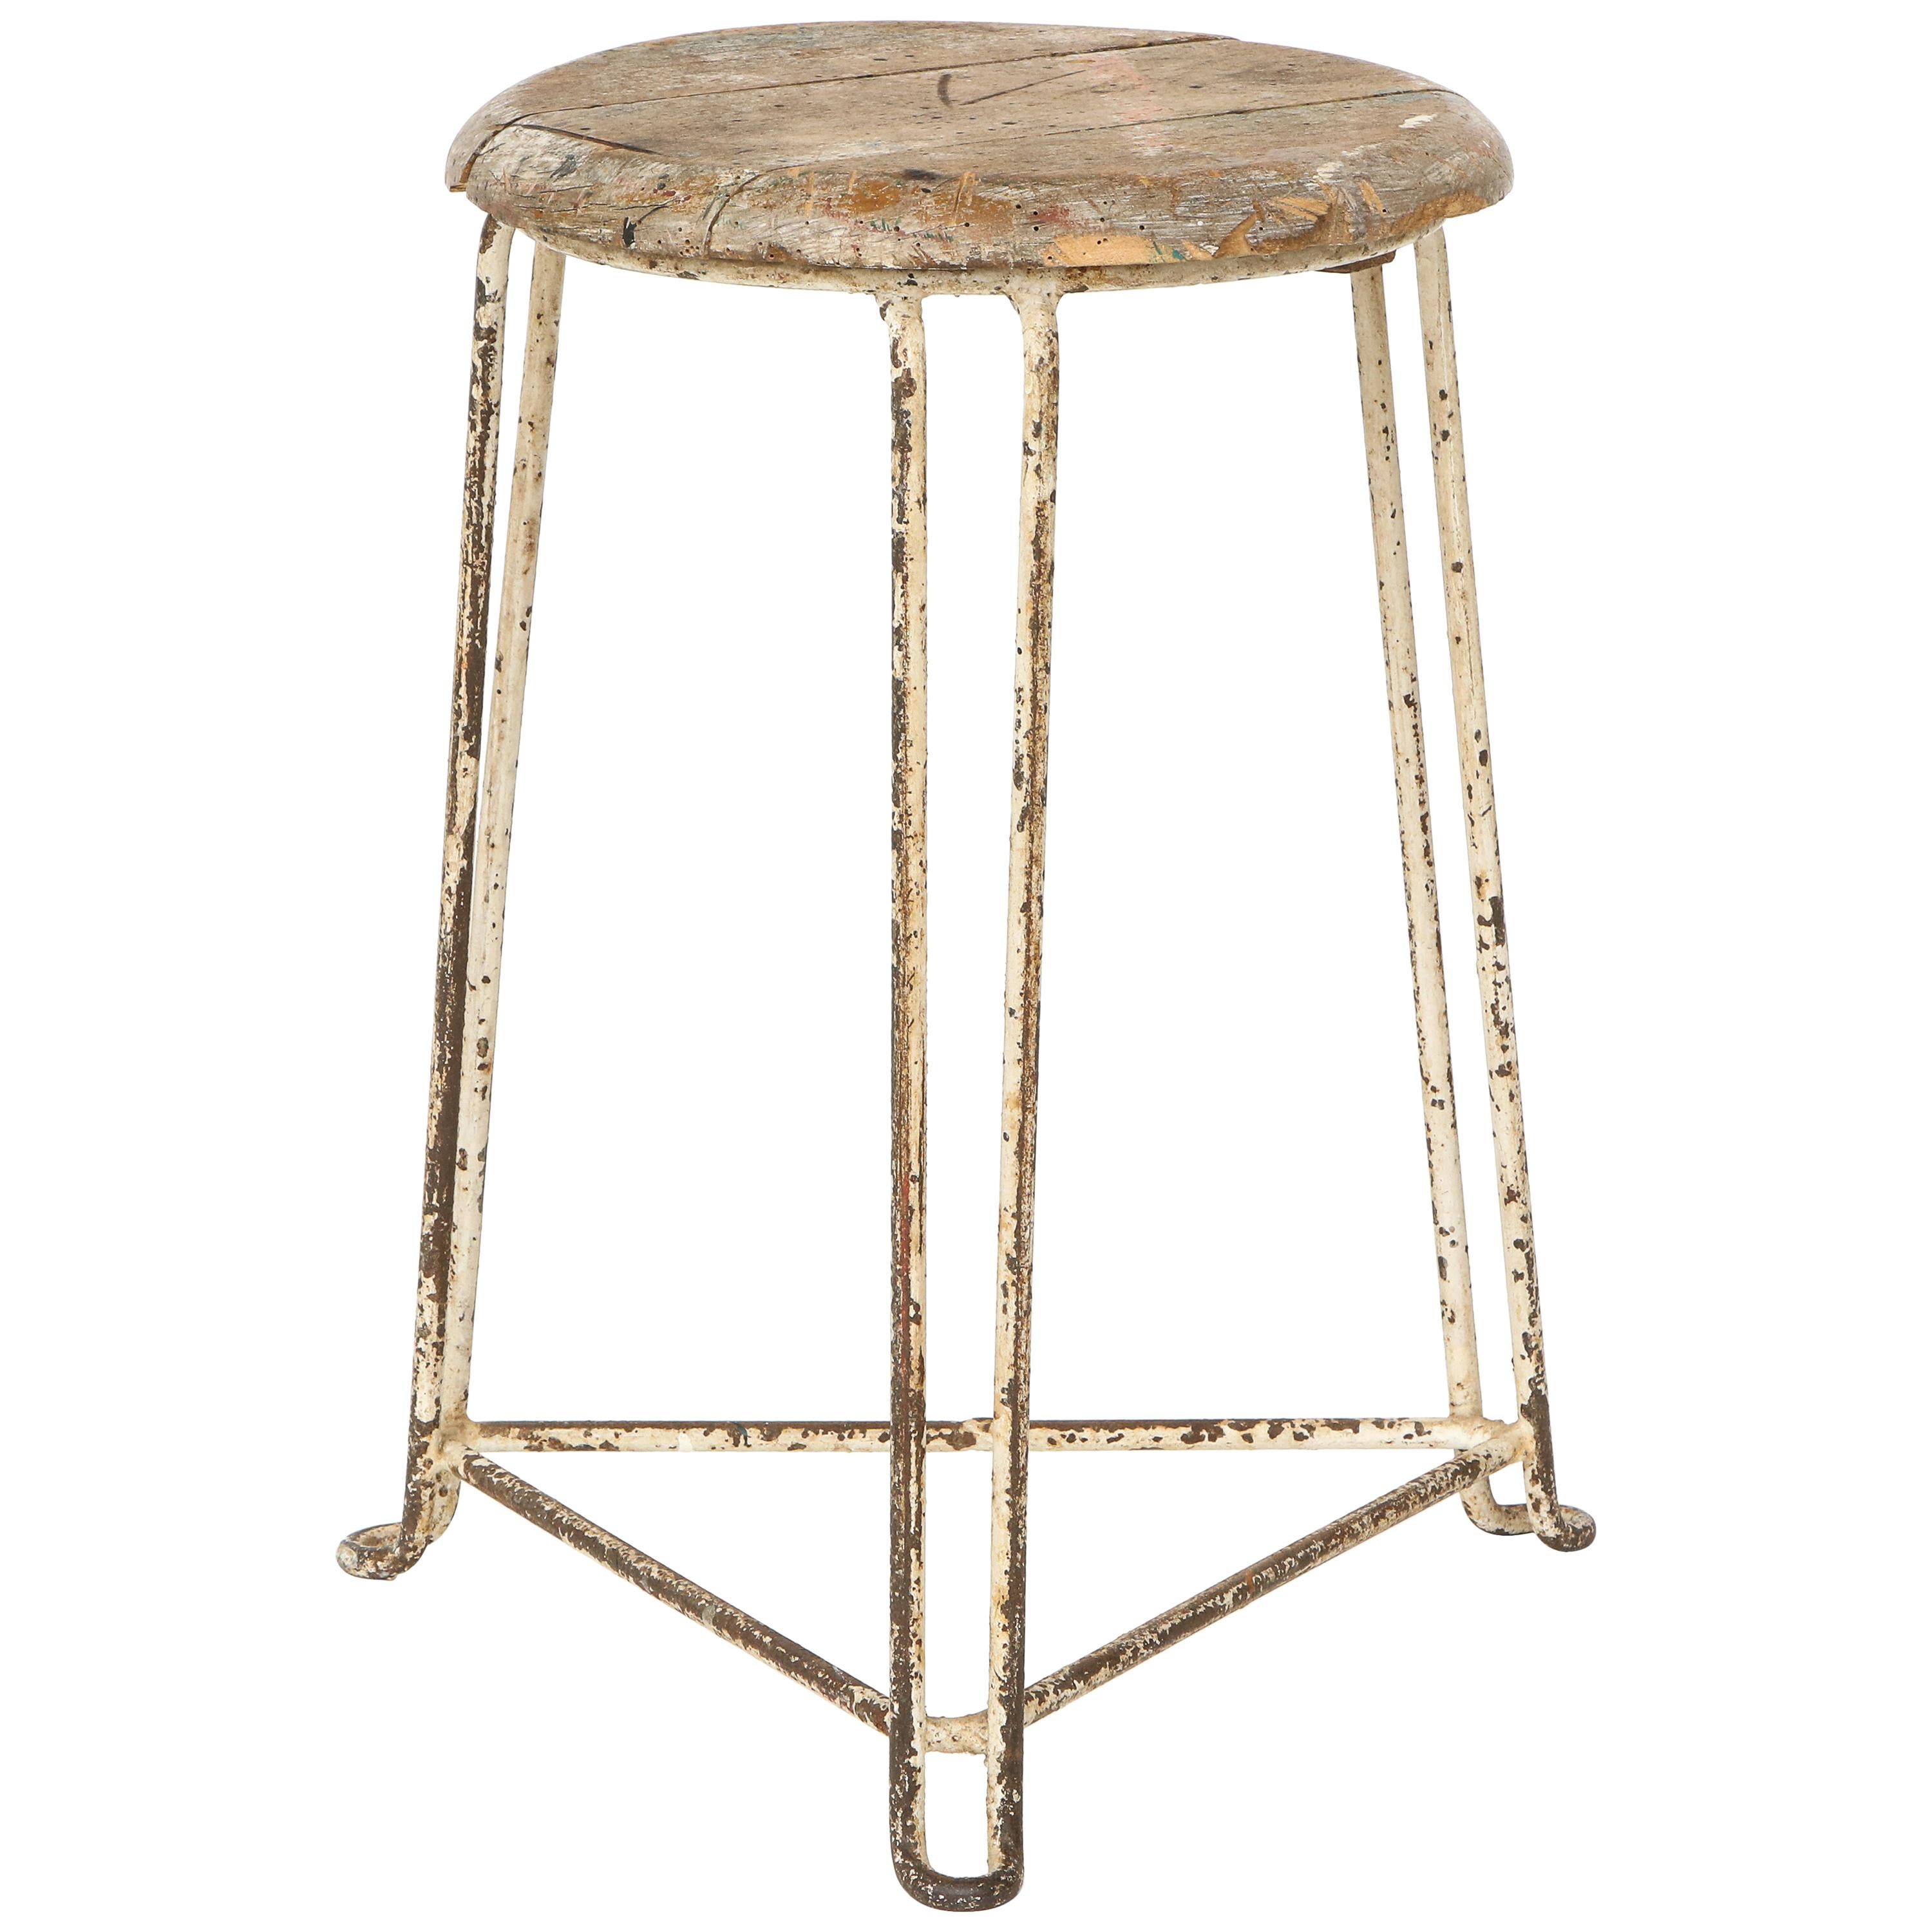 Excellent patina. For use as a stool or side table.